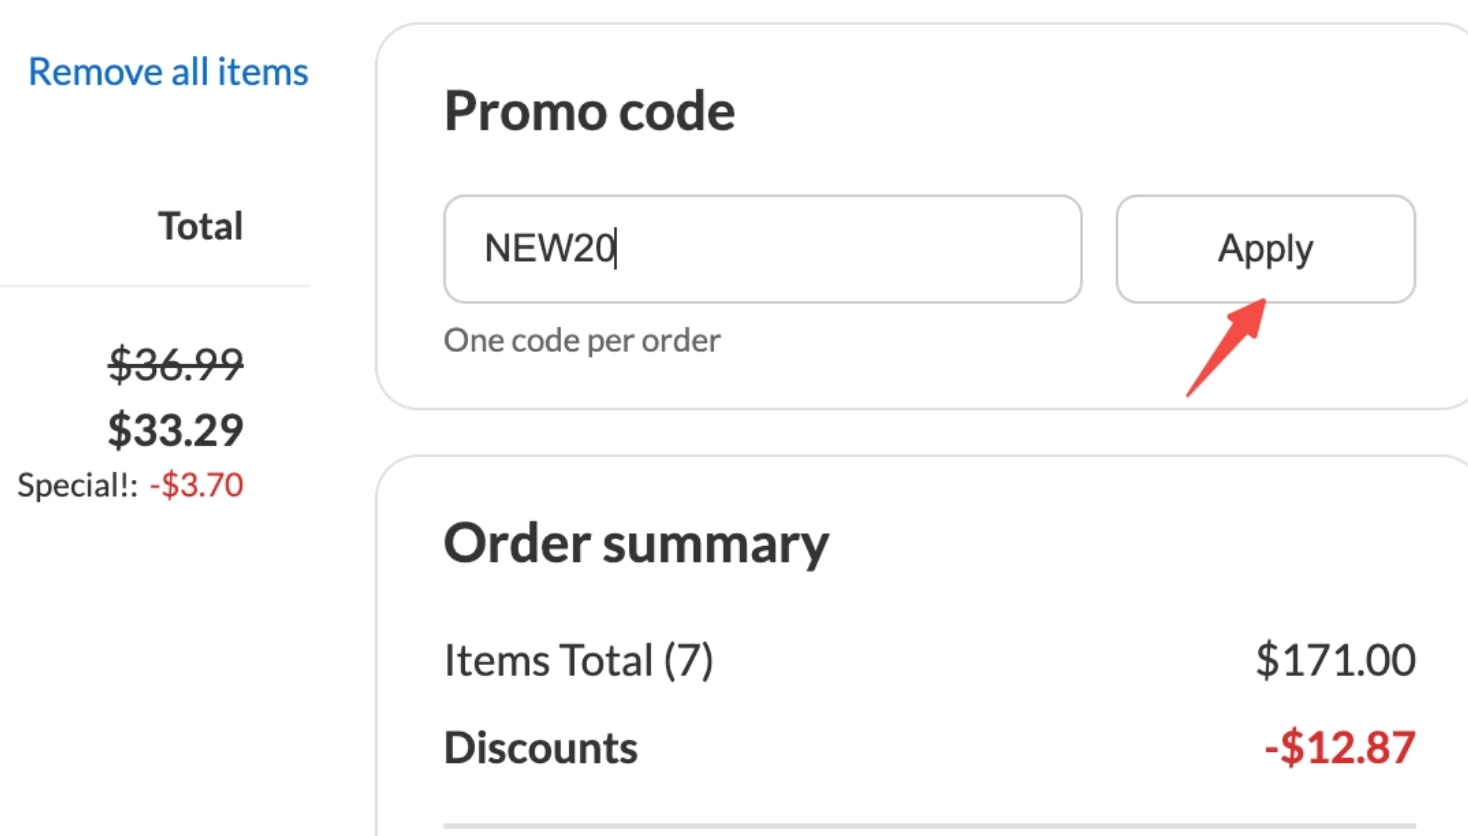 Step 3: When checking out at sticky9.com, paste the discount code into the specified promotional code box.